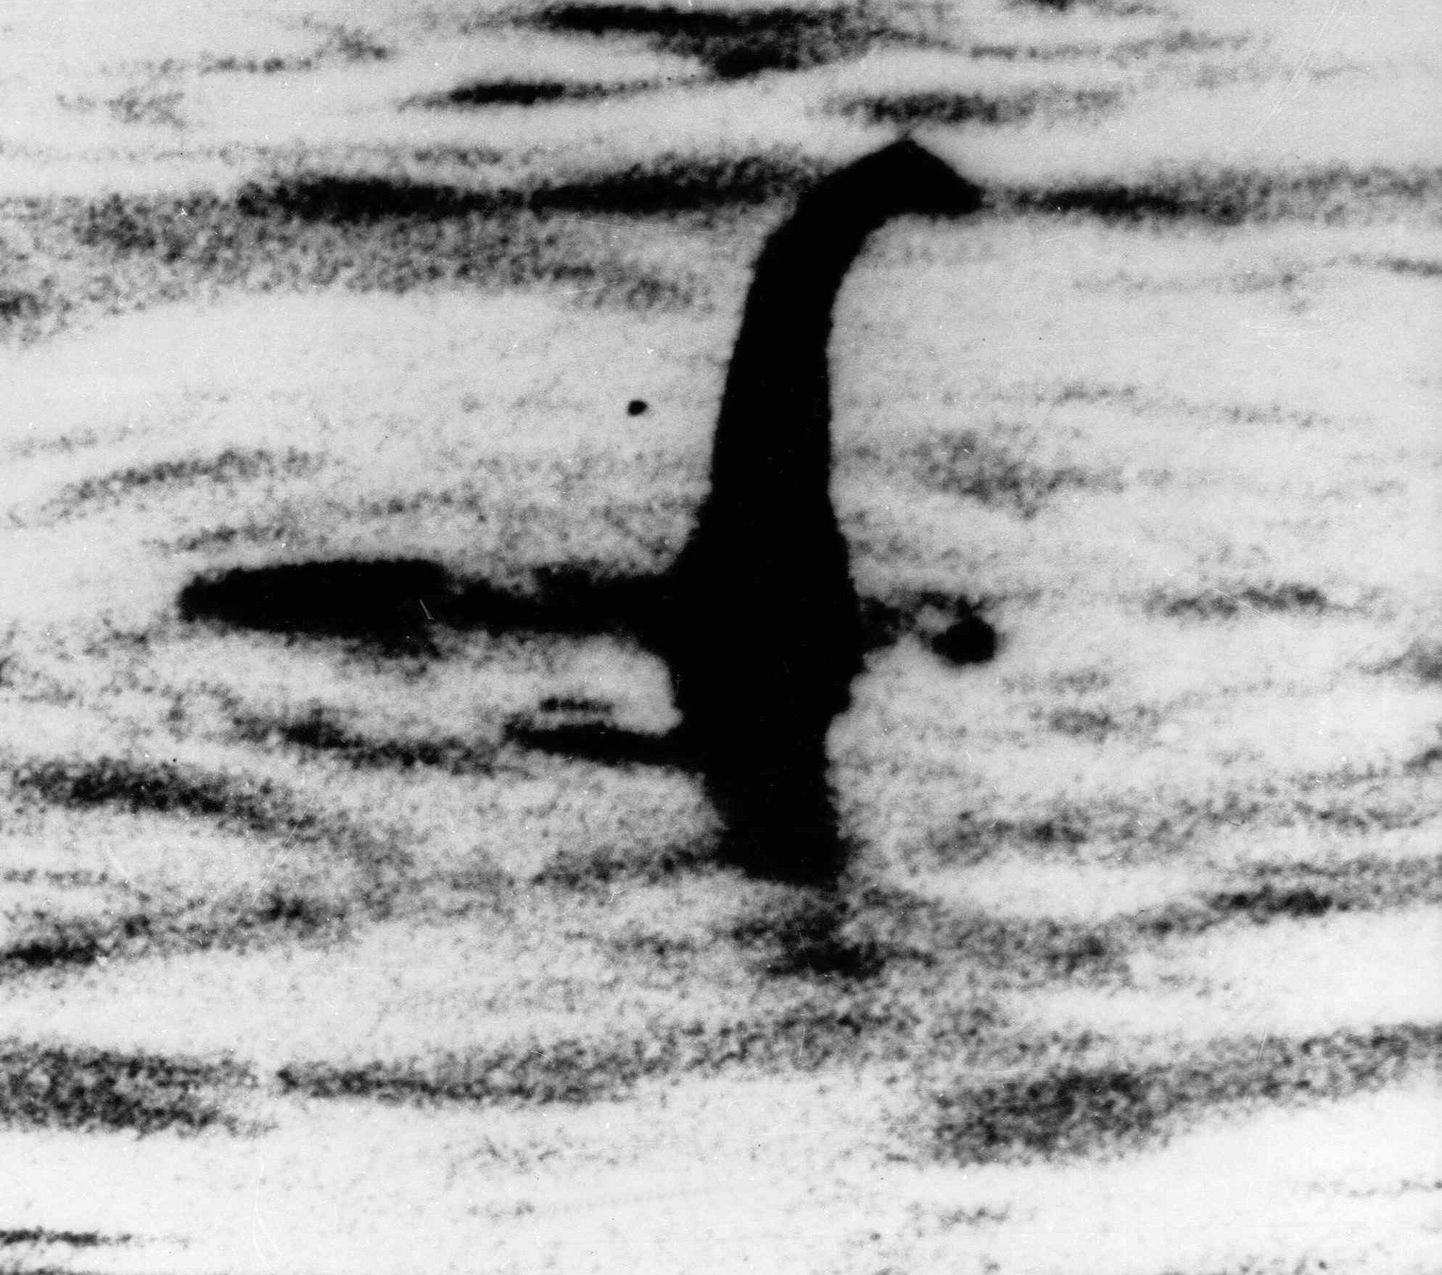 FILE -This is an undated file photo of a shadowy shape that some people say is a photo of the Loch Ness monster in Scotland. An underwater robot exploring Loch Ness has discovered a dark, monster-shaped mass in its depths. Disappointingly, tourism officials say Thursday April 14, 2016 the 30-foot (9 meter), object is not the fabled Loch Ness Monster, but a prop left over from a 1970 film.  (AP Photo, File)